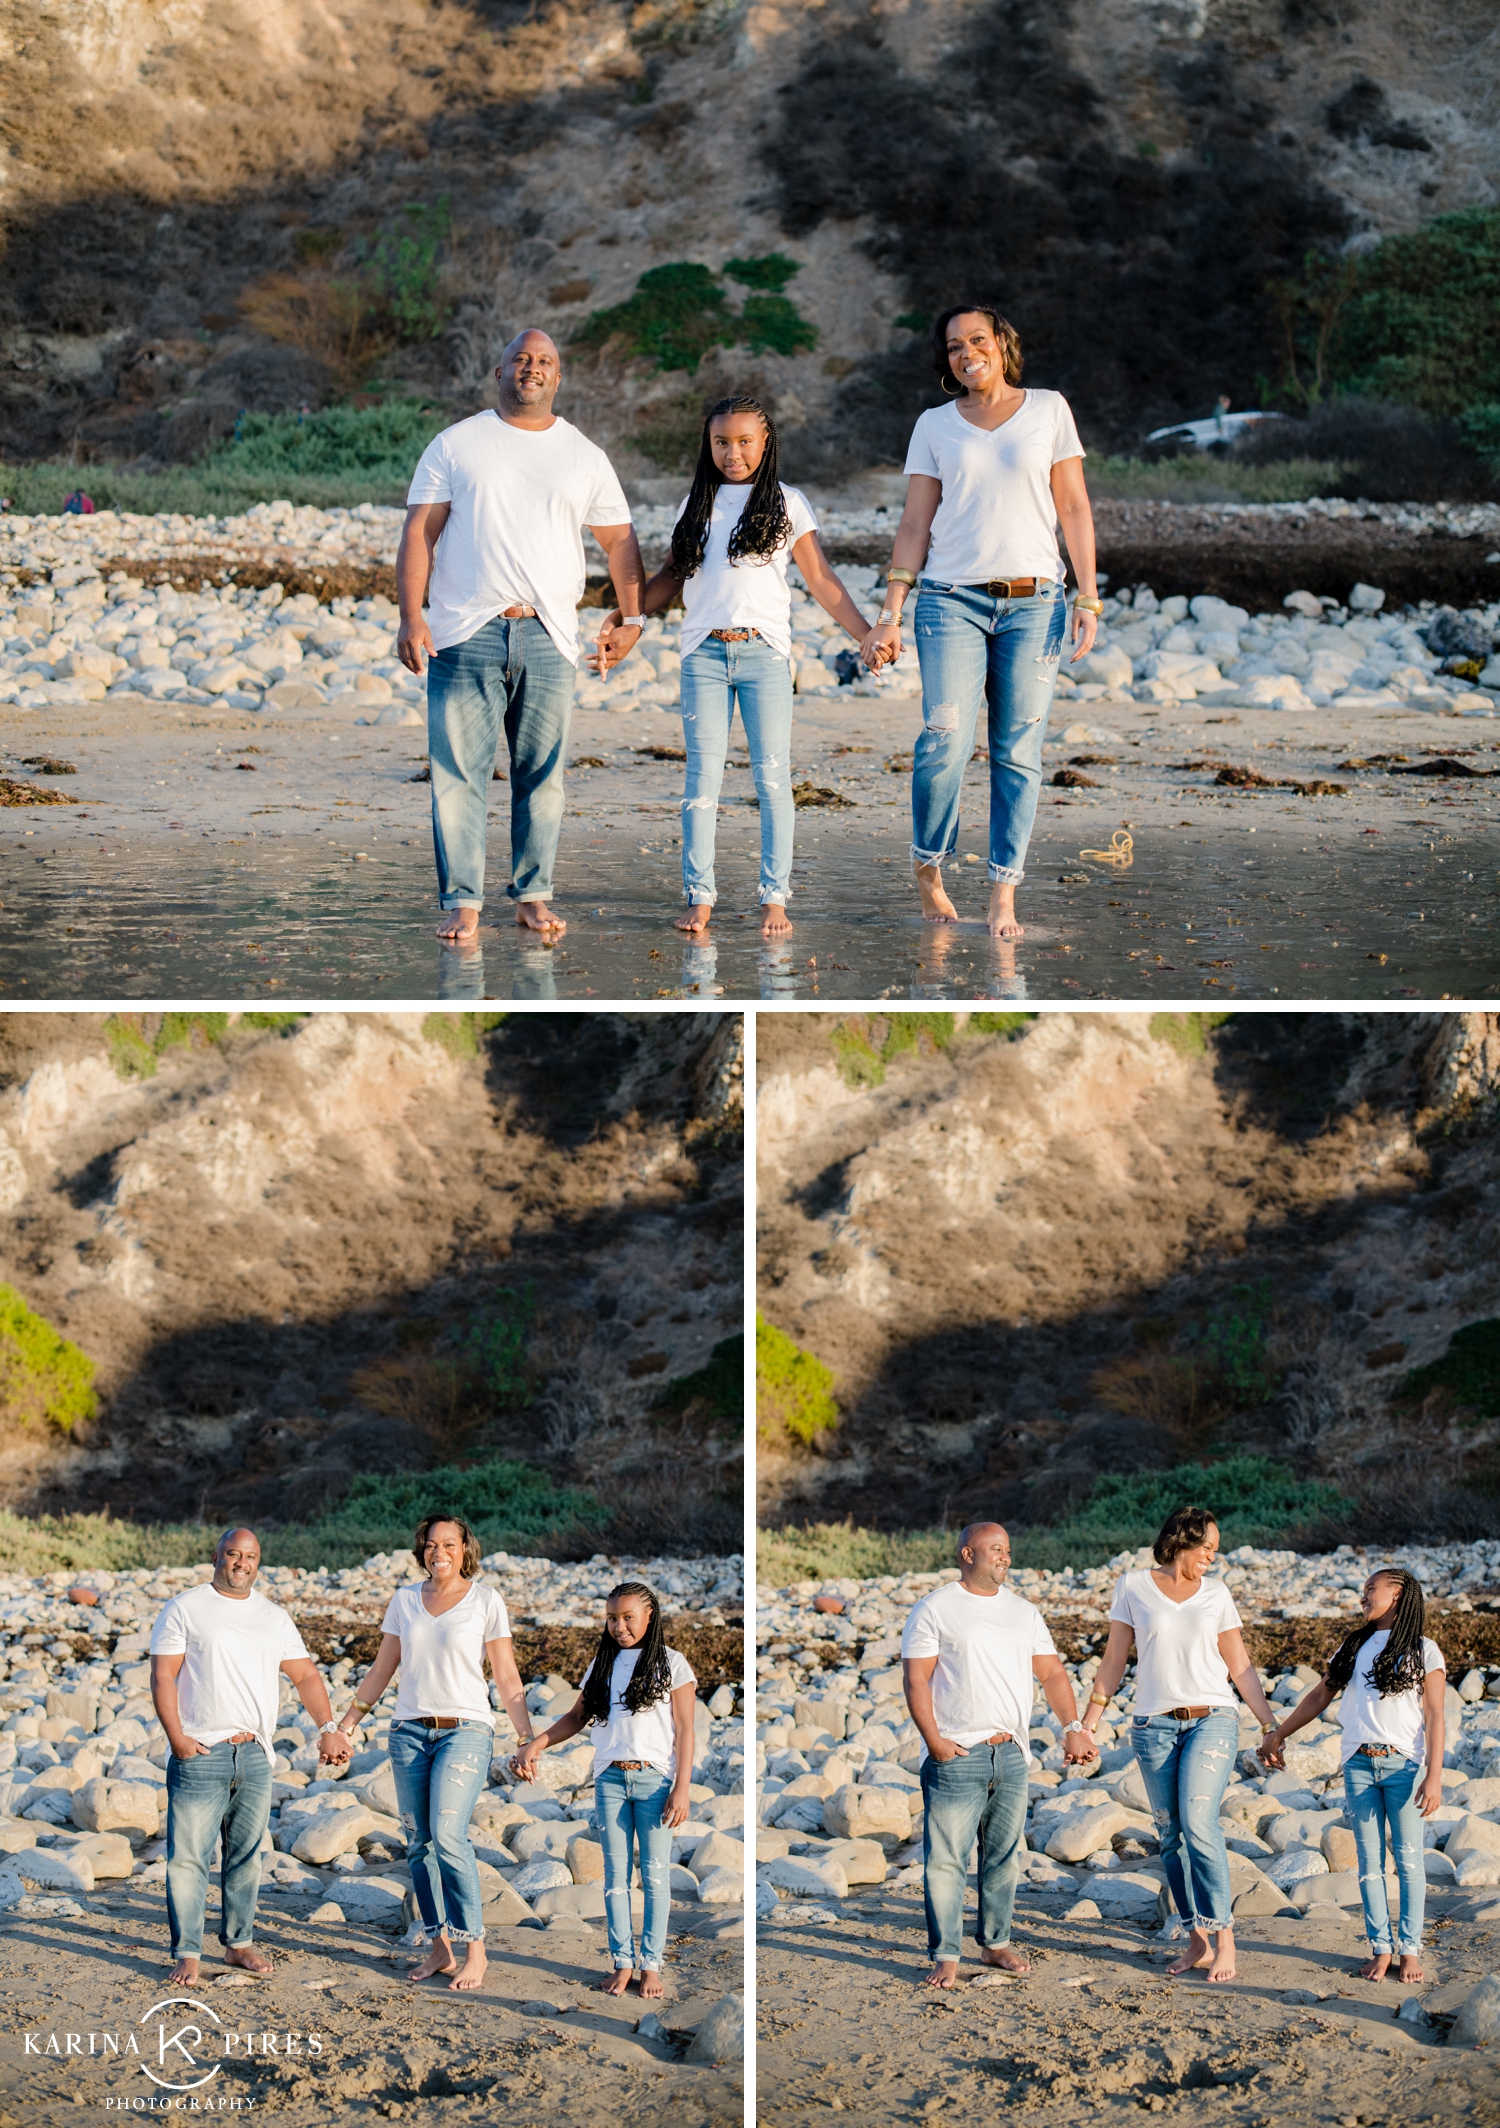 Family portraits in Los Angeles